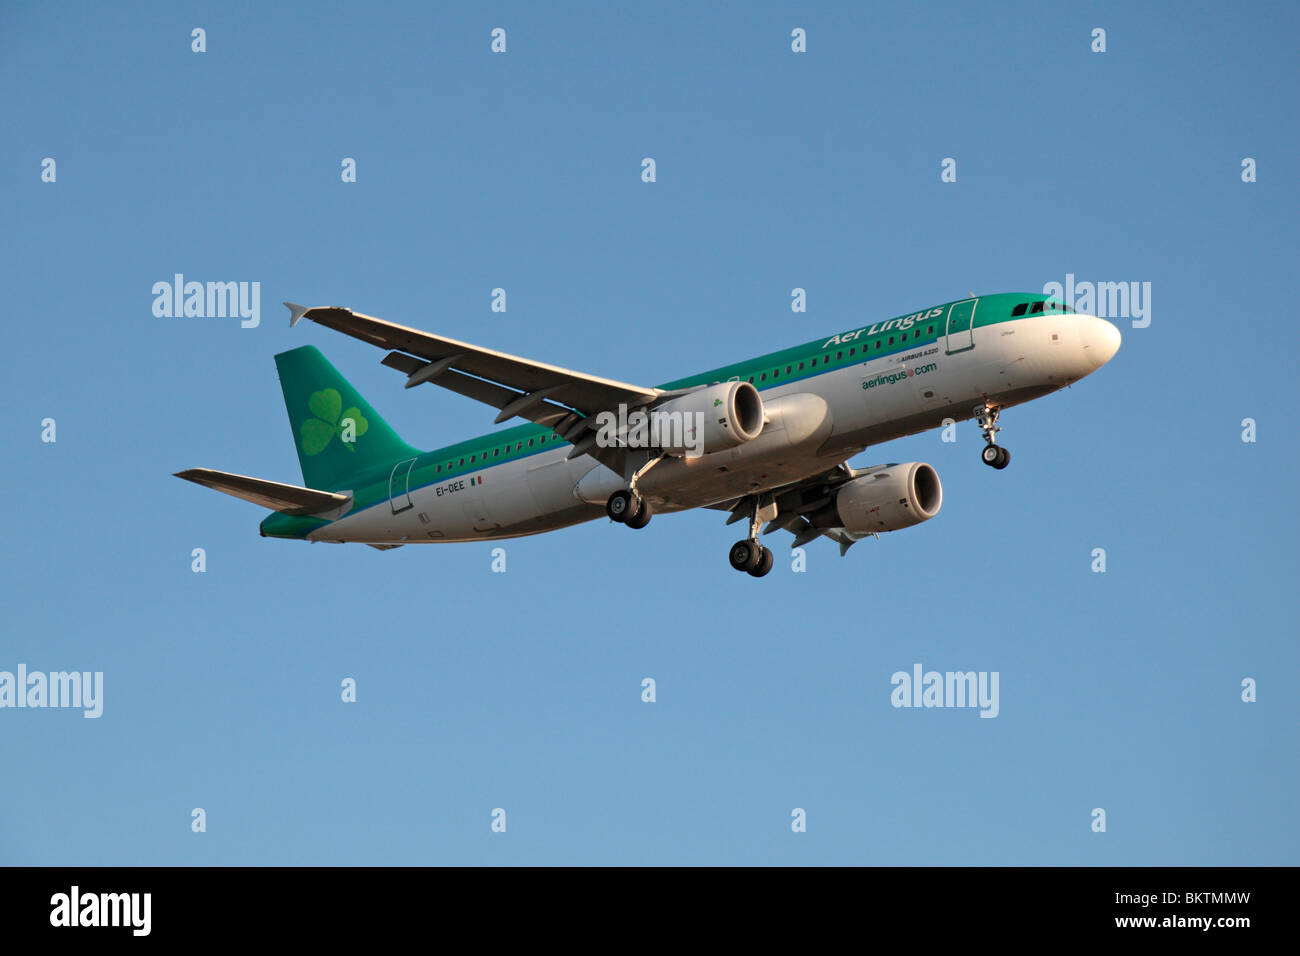 An Aer Lingus Airbus A320-214 coming in to land at London Heathrow, UK.  August 2009. (EI-DEE) Stock Photo